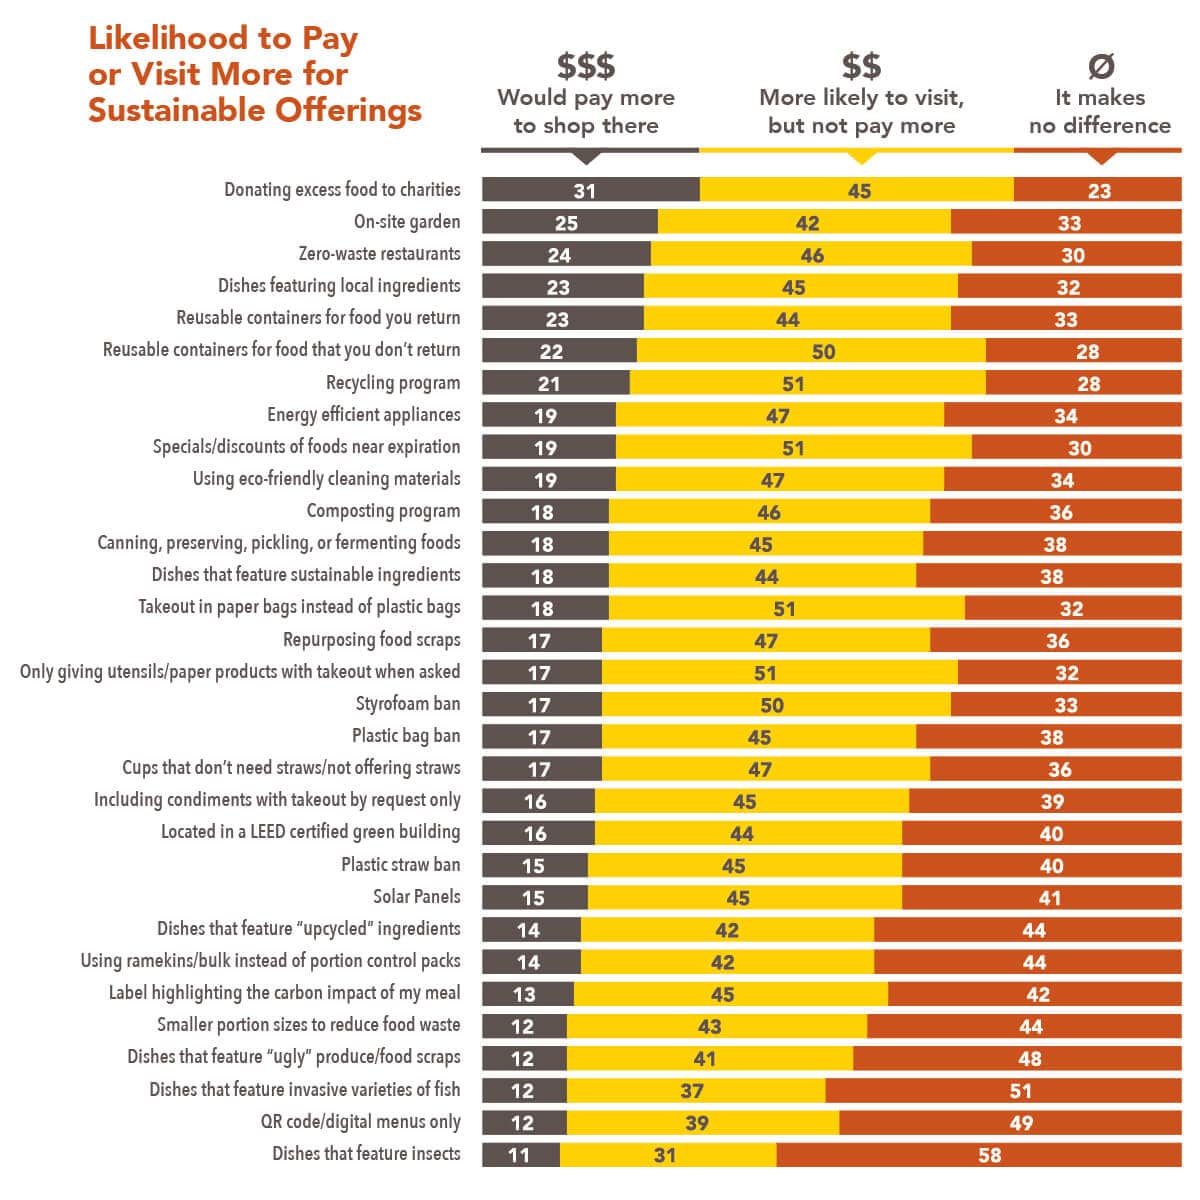 Consumer Likelihood to Pay More for Sustainable Offerings Chart